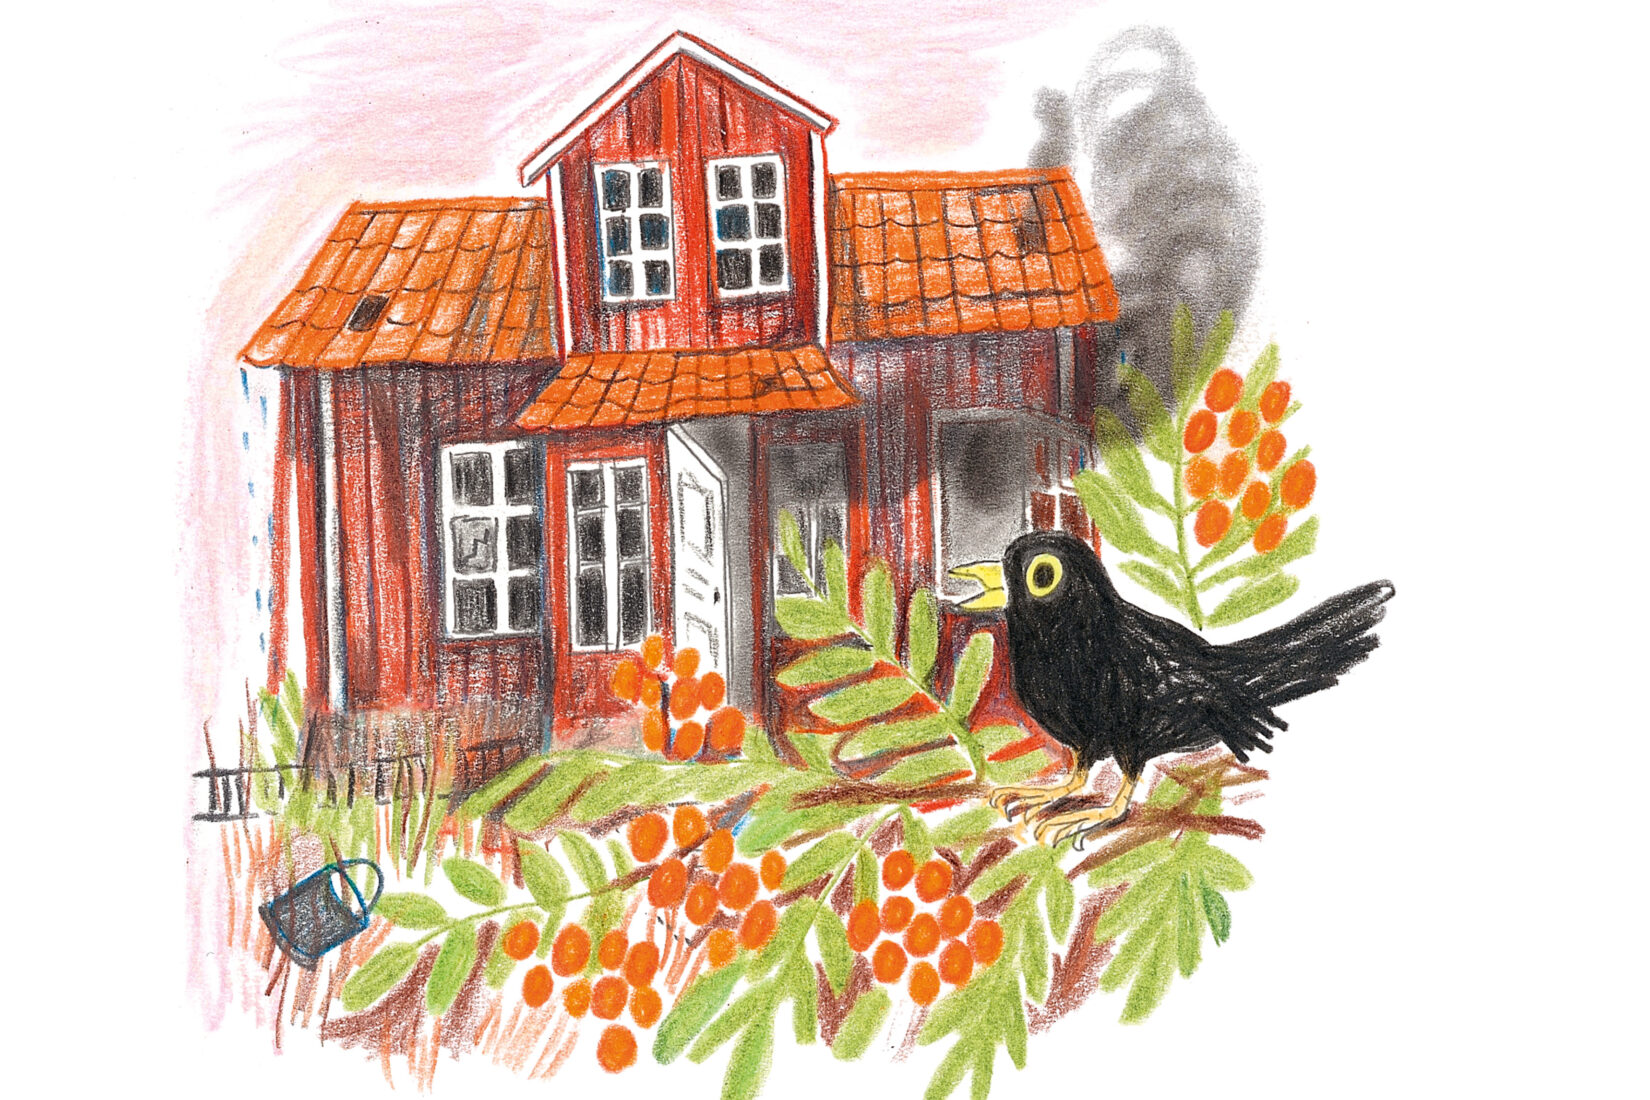 Drawing of a red wooden house in the middle of the woods, with a bird on a branch in the foreground.